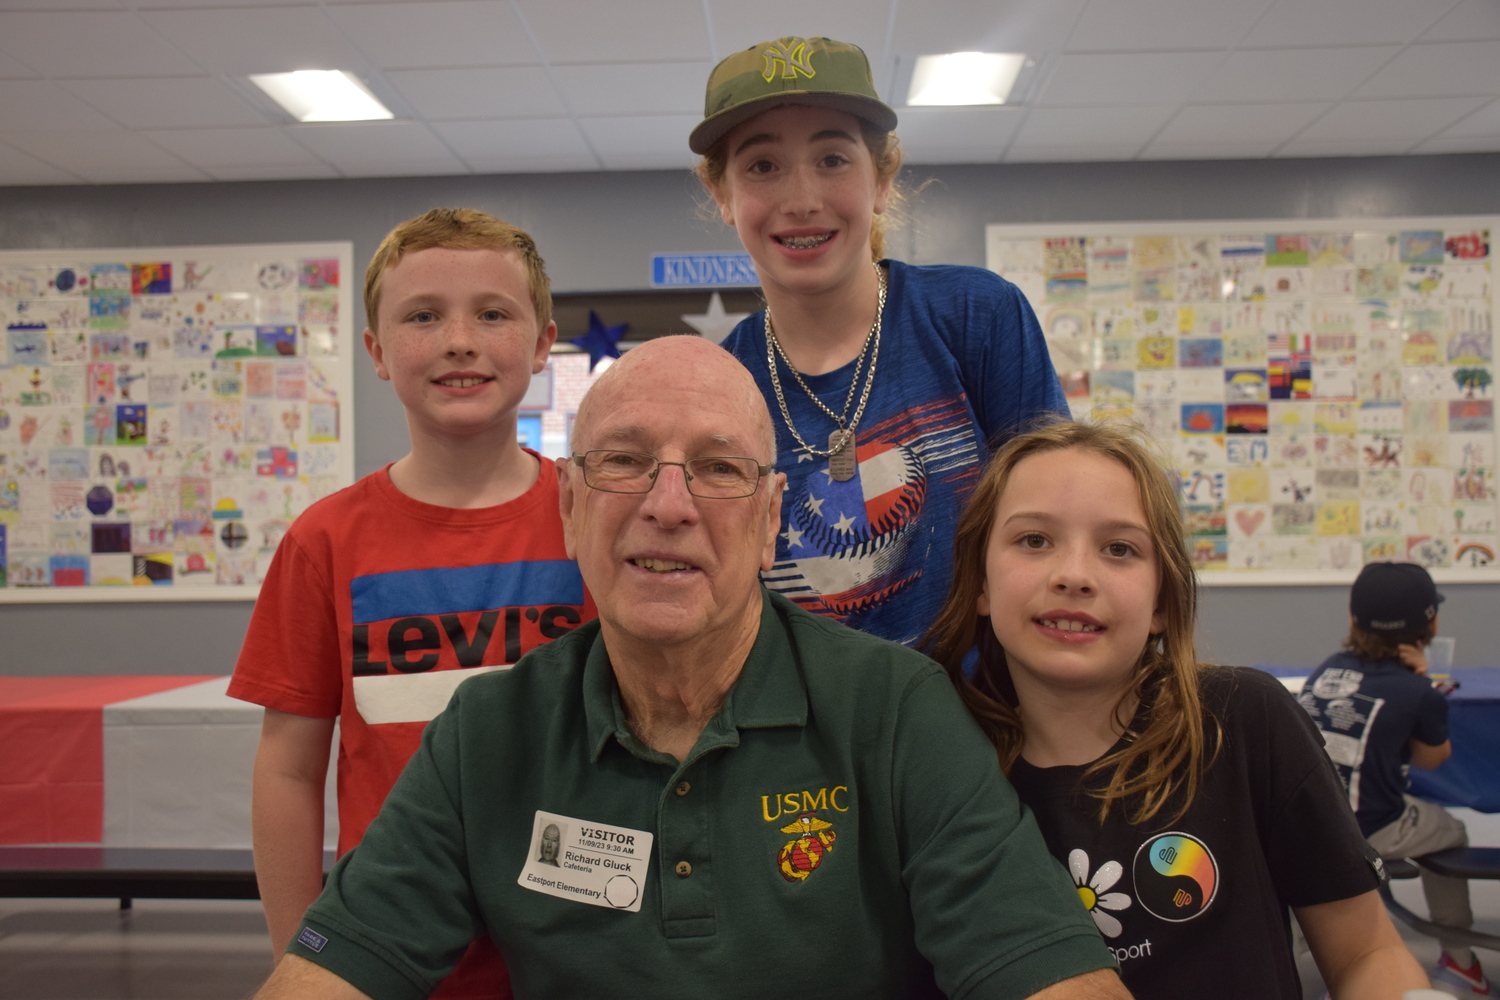 Veteran Richard Gluck attended the Eastport Elementary School Veterans Day breakfast
with his grandchildren Claire Willsey, right, and, back Nick Gluck and Evelyn Gluck. COURTESY EASTPORT-SOUTH MANOR SCHOOL DISTRICT